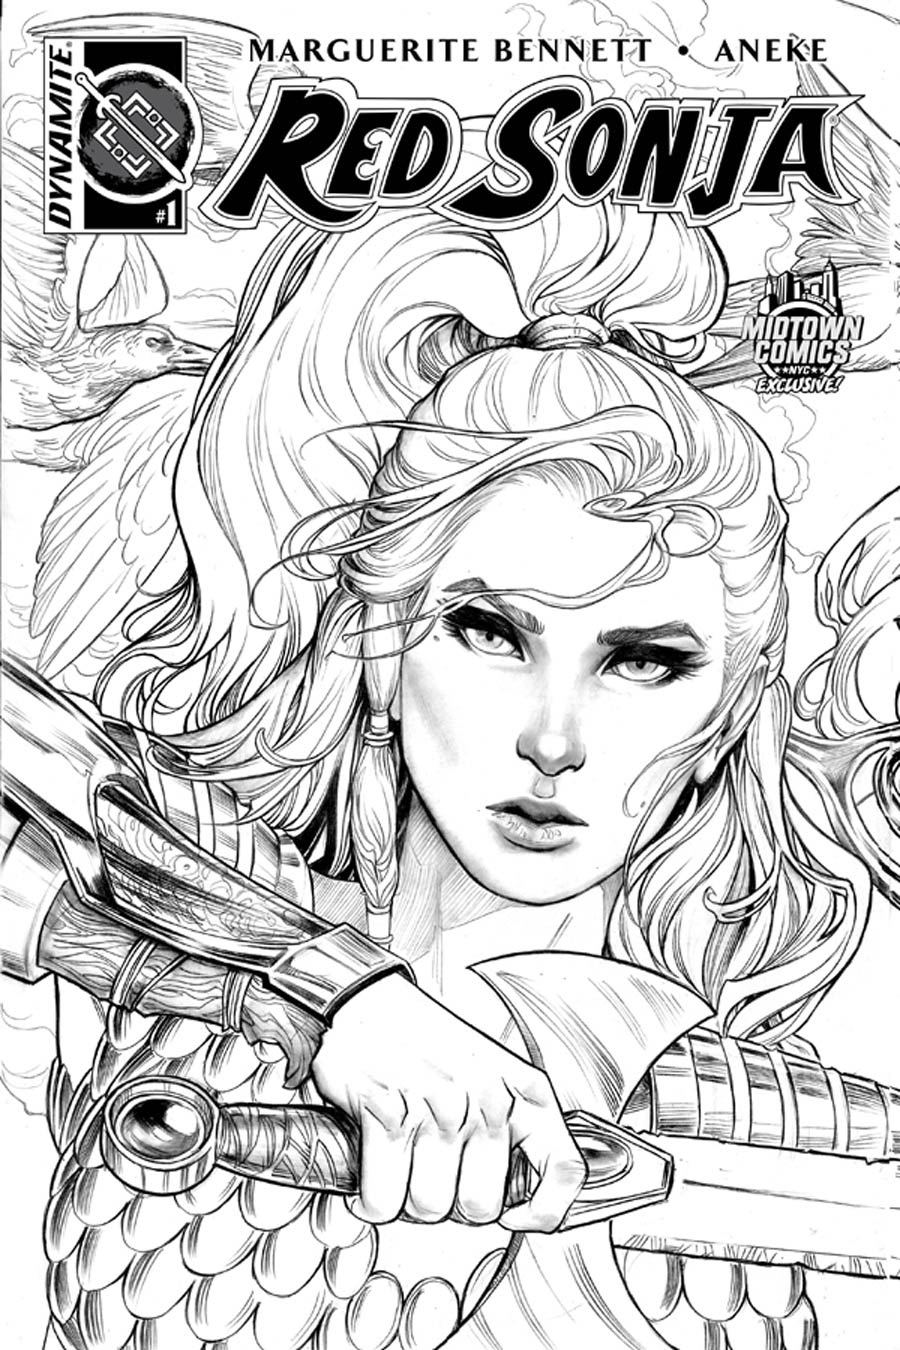 Red Sonja Vol 6 #1 Cover C Ultra-Limited Nei Ruffino Connecting Black & White Variant Cover